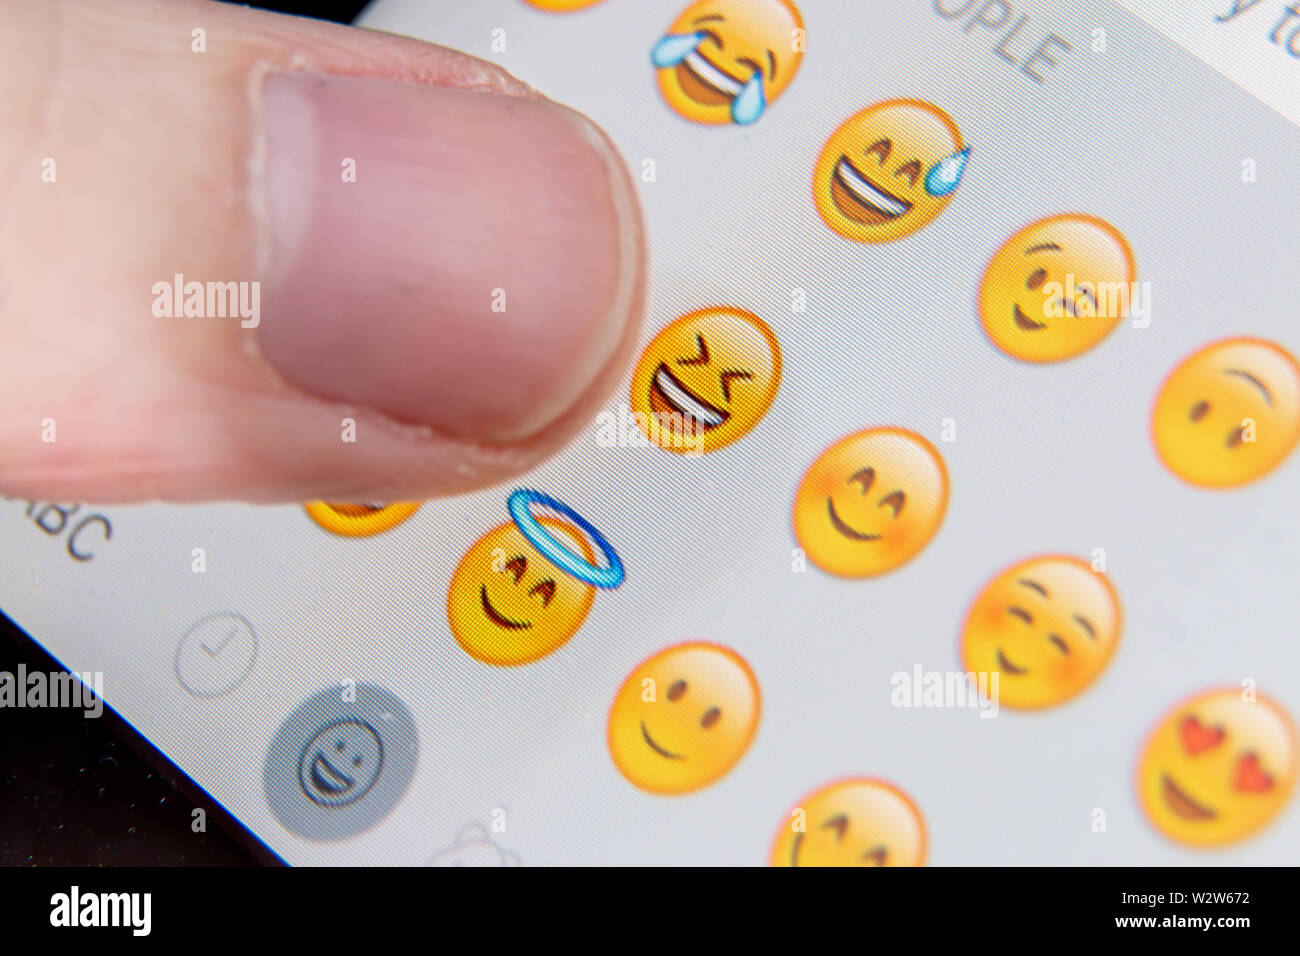 Close up of someone slecting an emoji character Stock Photo